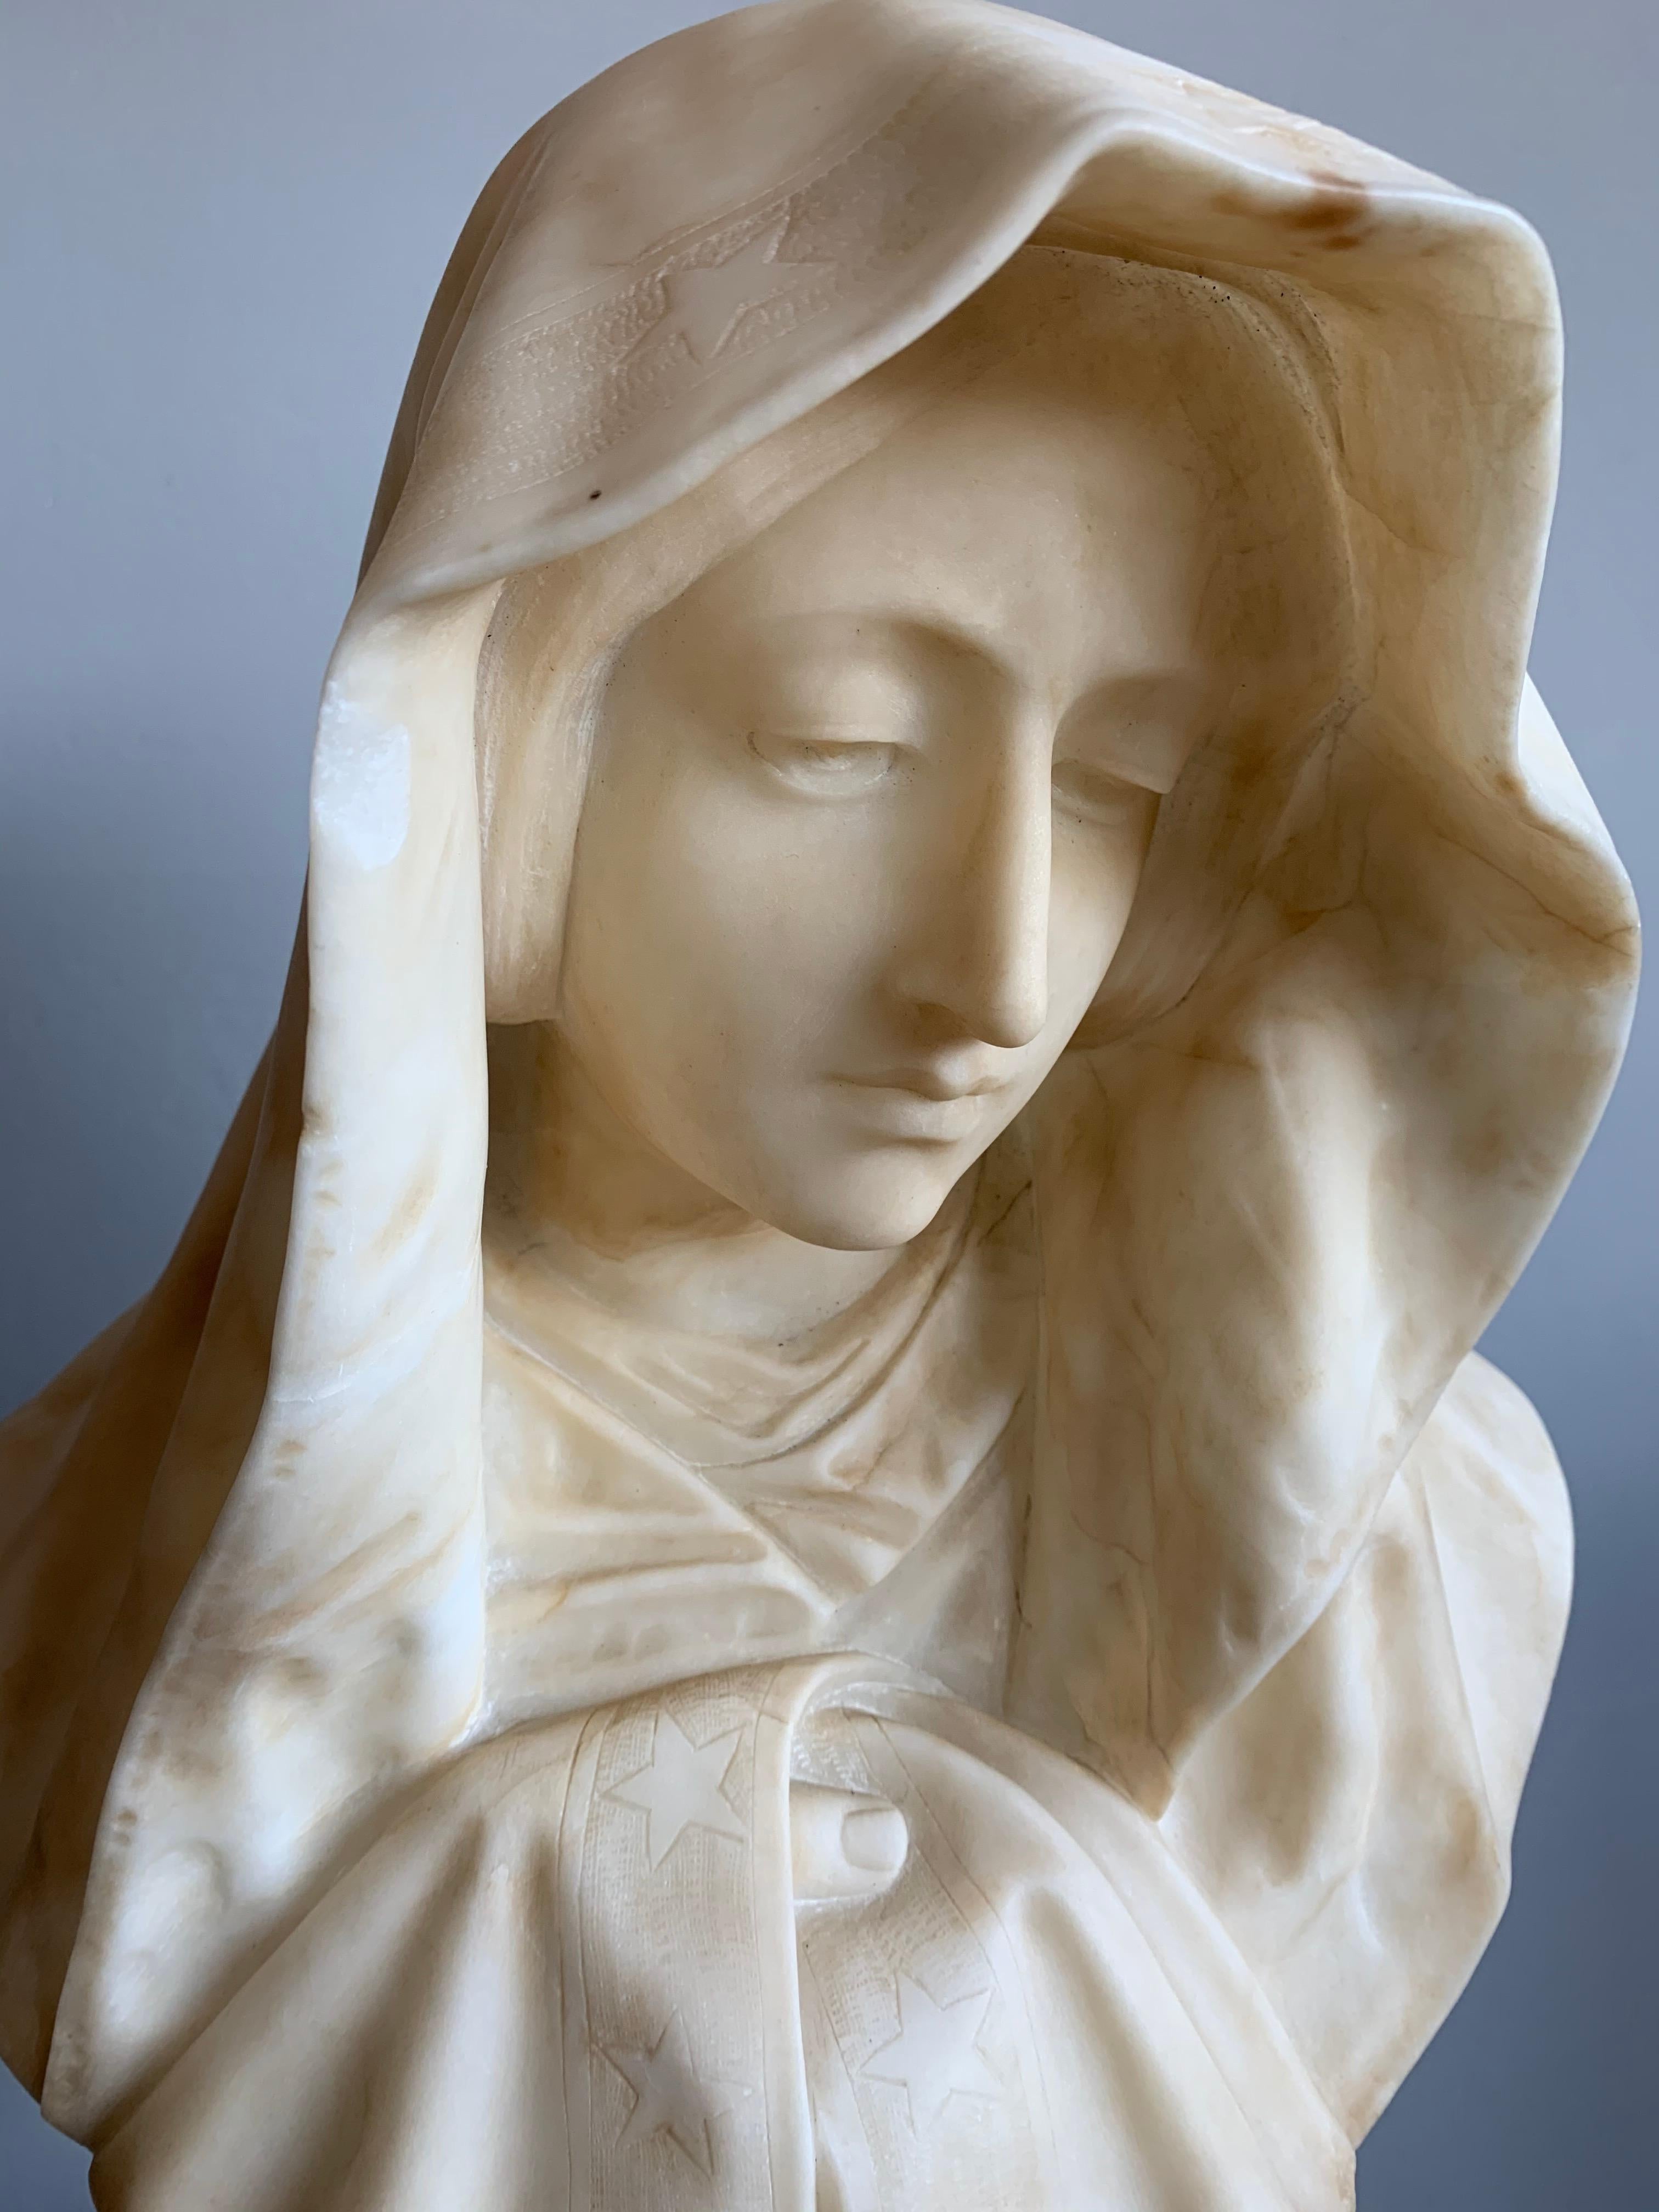 Gothic Revival Rare and Hand Carved Early 1900 Alabaster Bust Sculpture of a Serene Virgin Mary